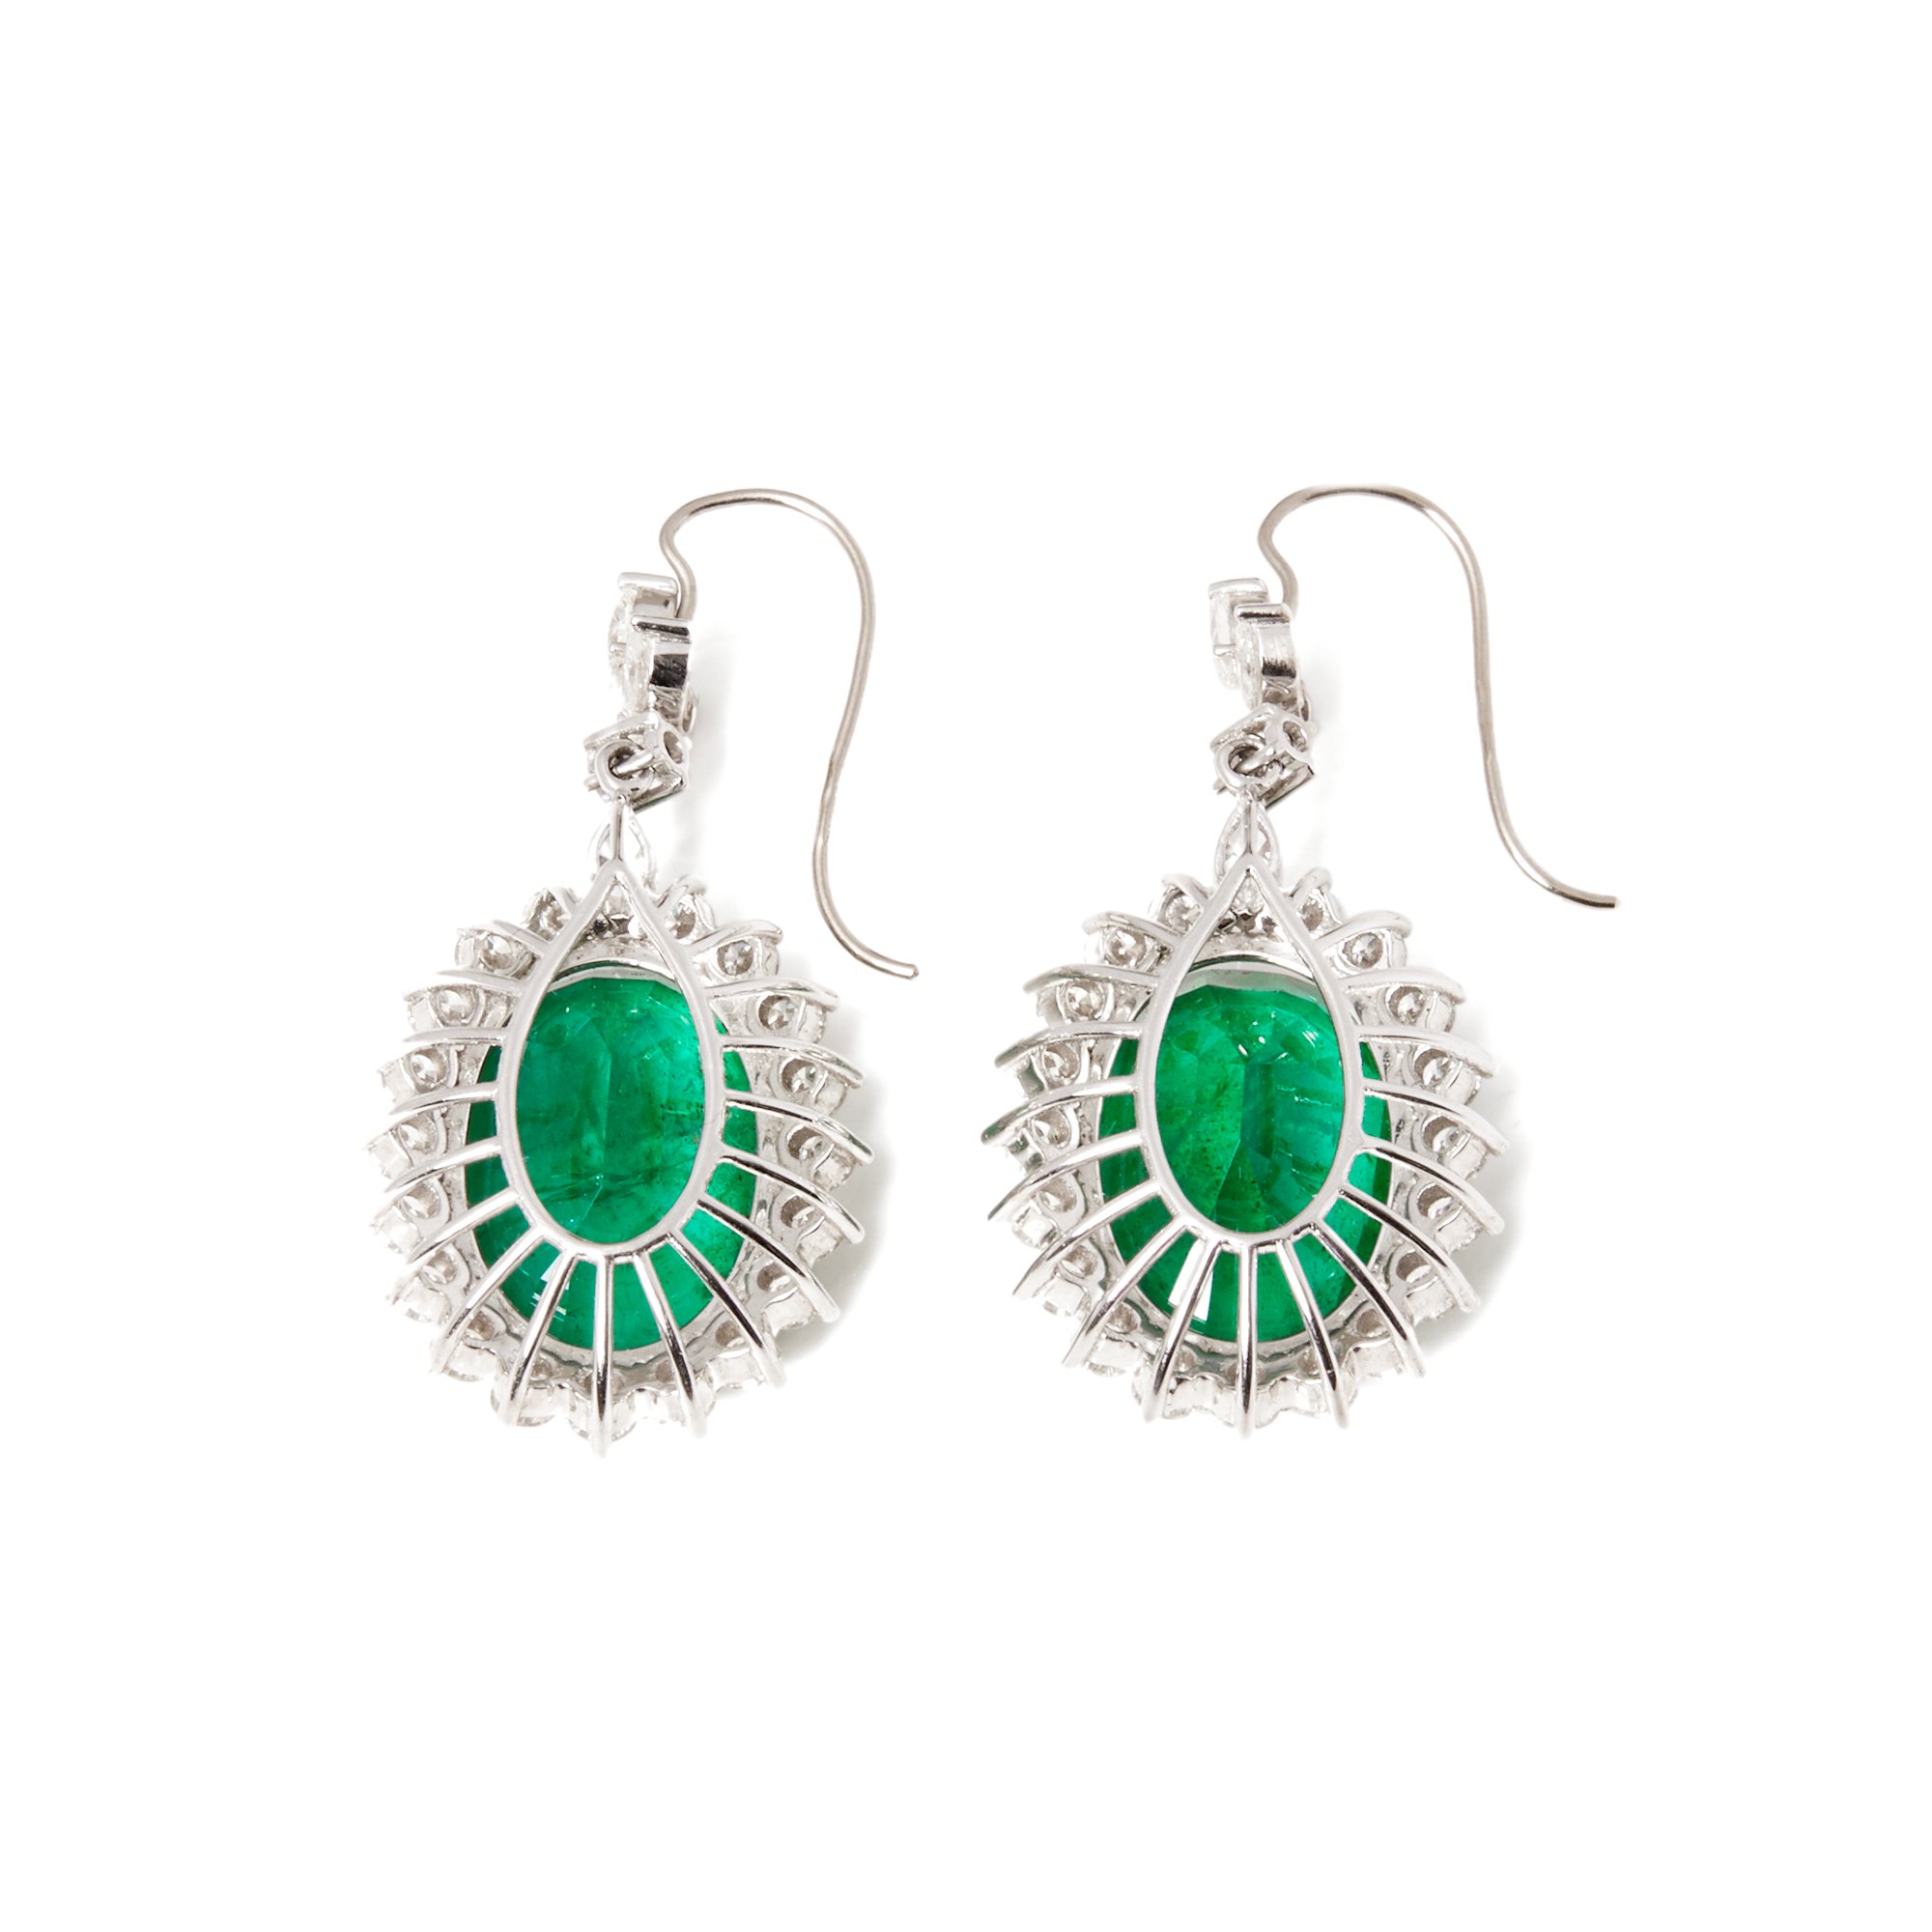 David Jerome 35.17ct Oval Cut Colombian Emerald and Diamond 18ct Gold Drop Earrings